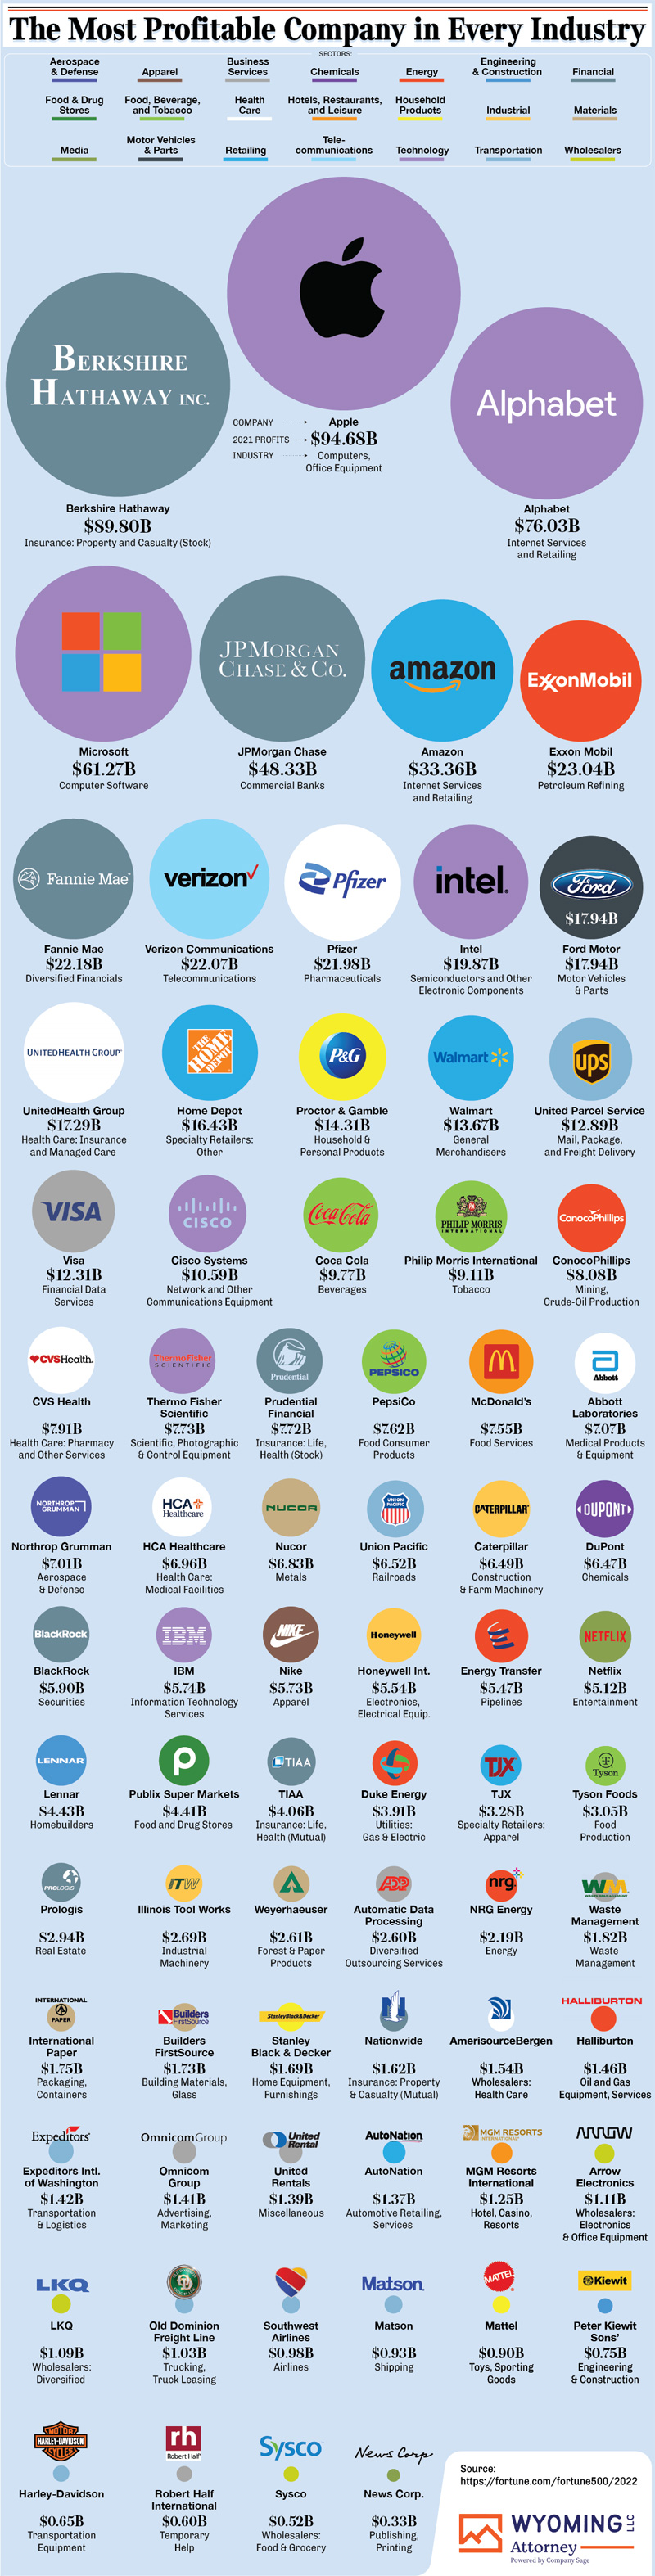 The Most Profitable Company In Every Industry